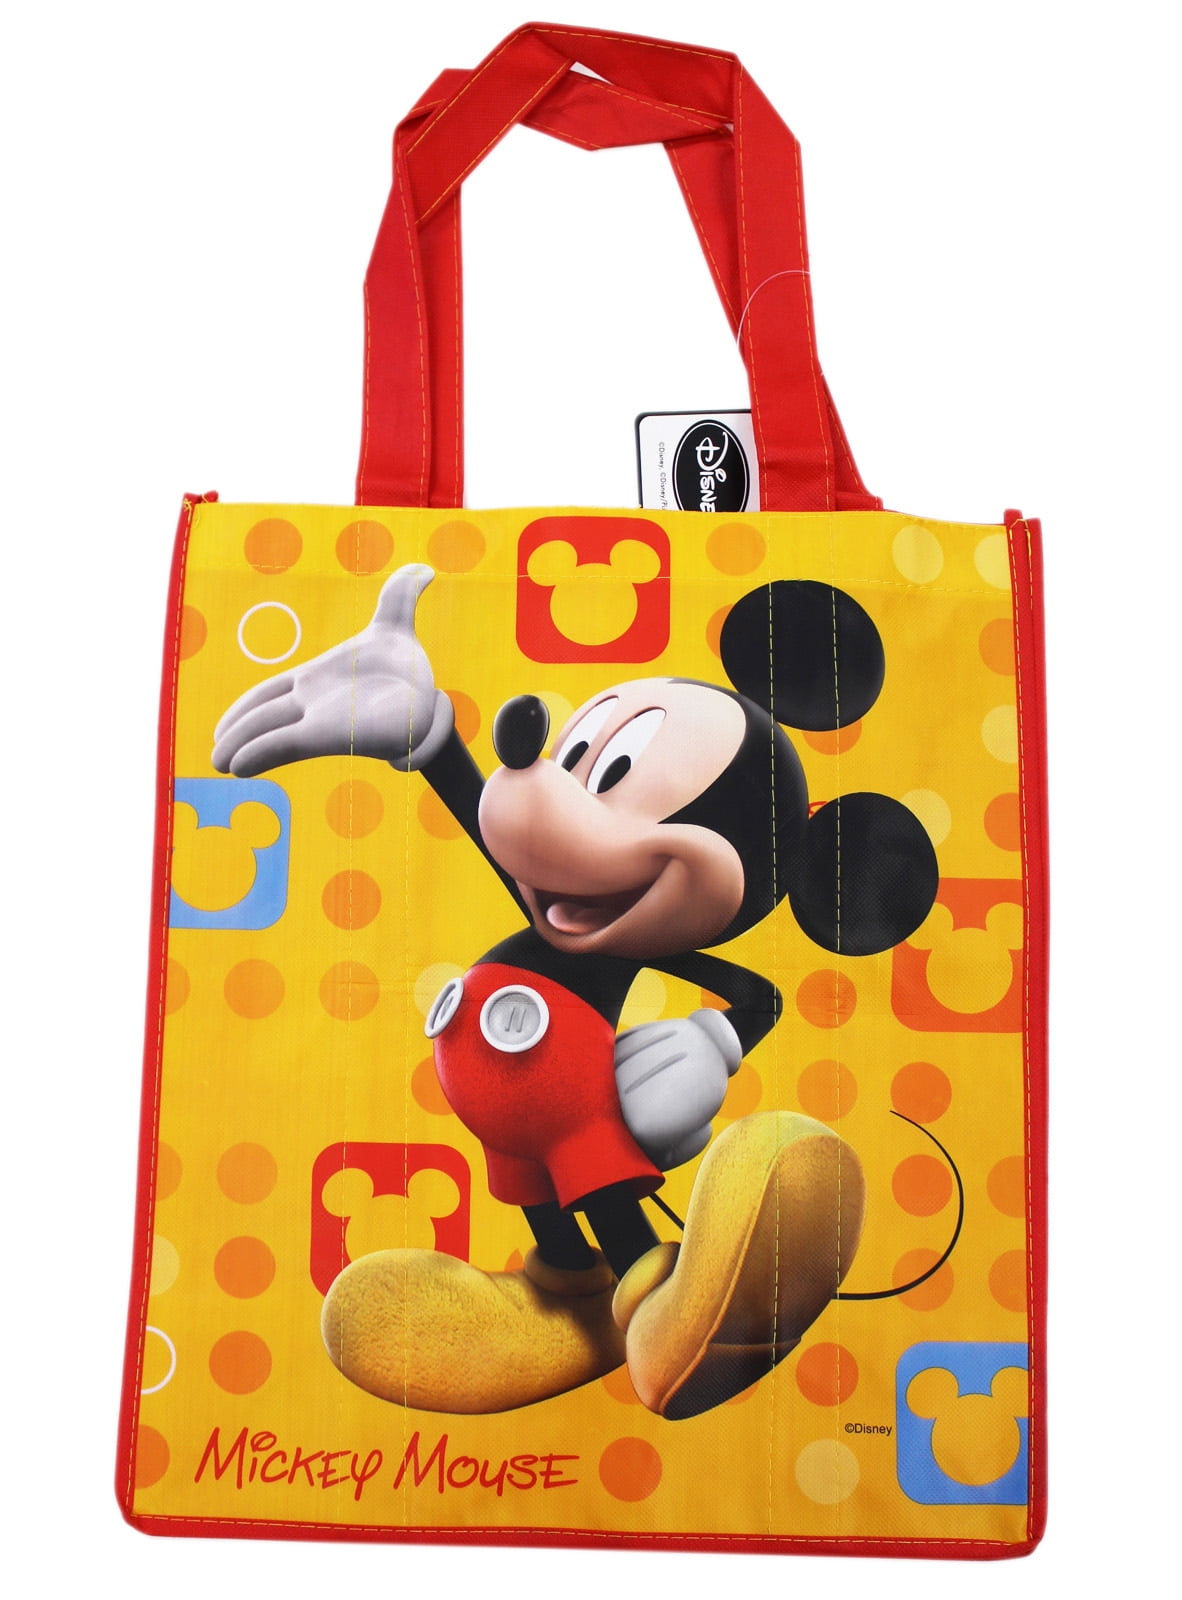 DISNEY Tote Bag Reusable MINNIE MOUSE grocery shopping school library toys 